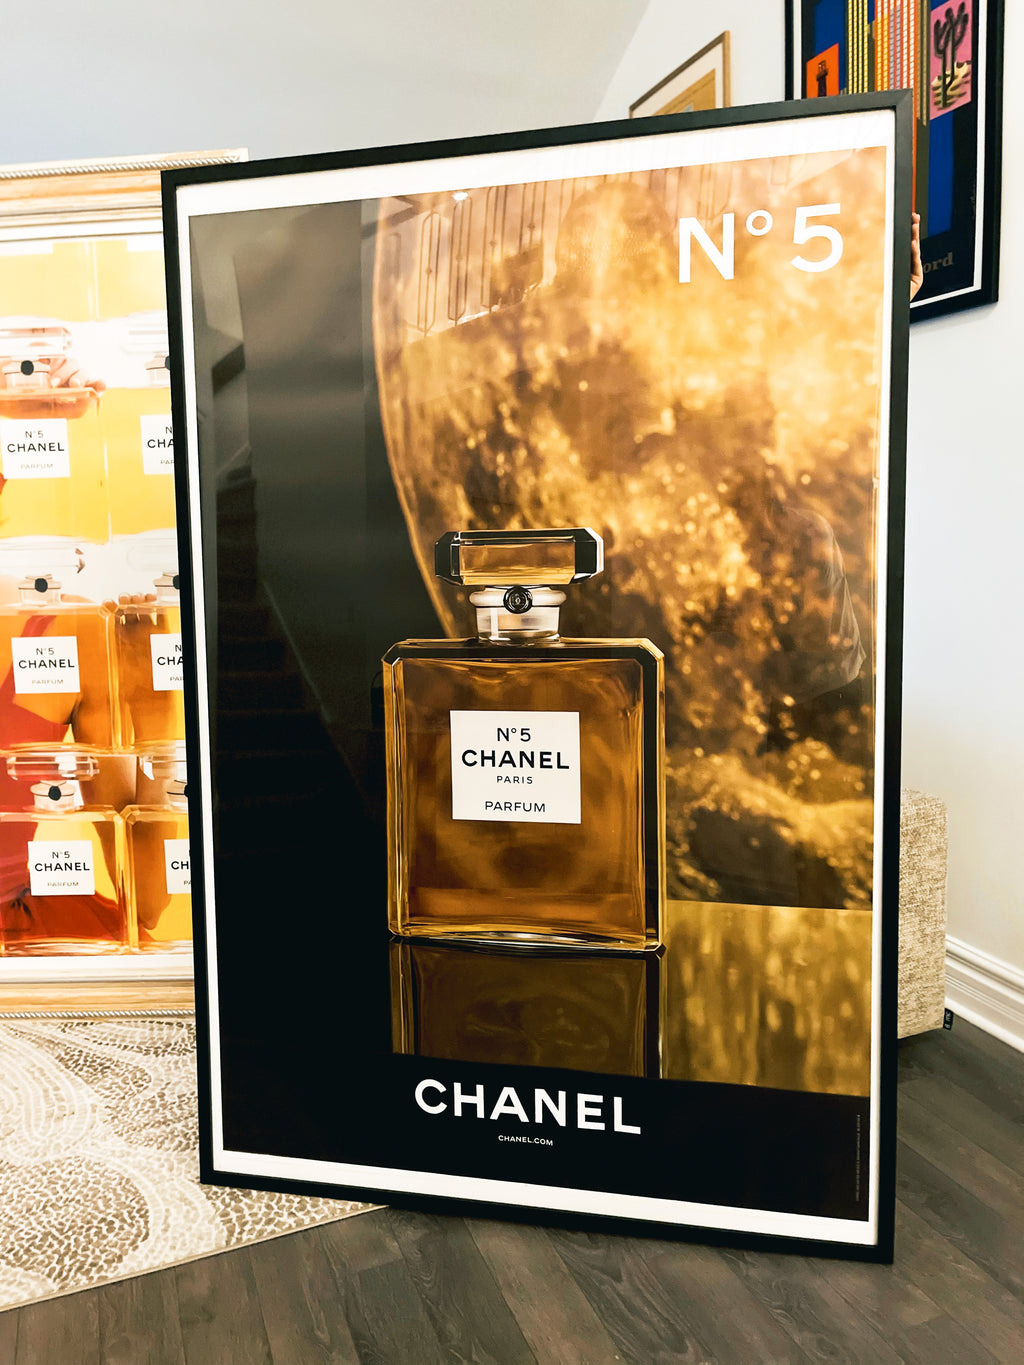 Buy Original Vintage Advertising Poster by Chanel 1998 CHANEL N5